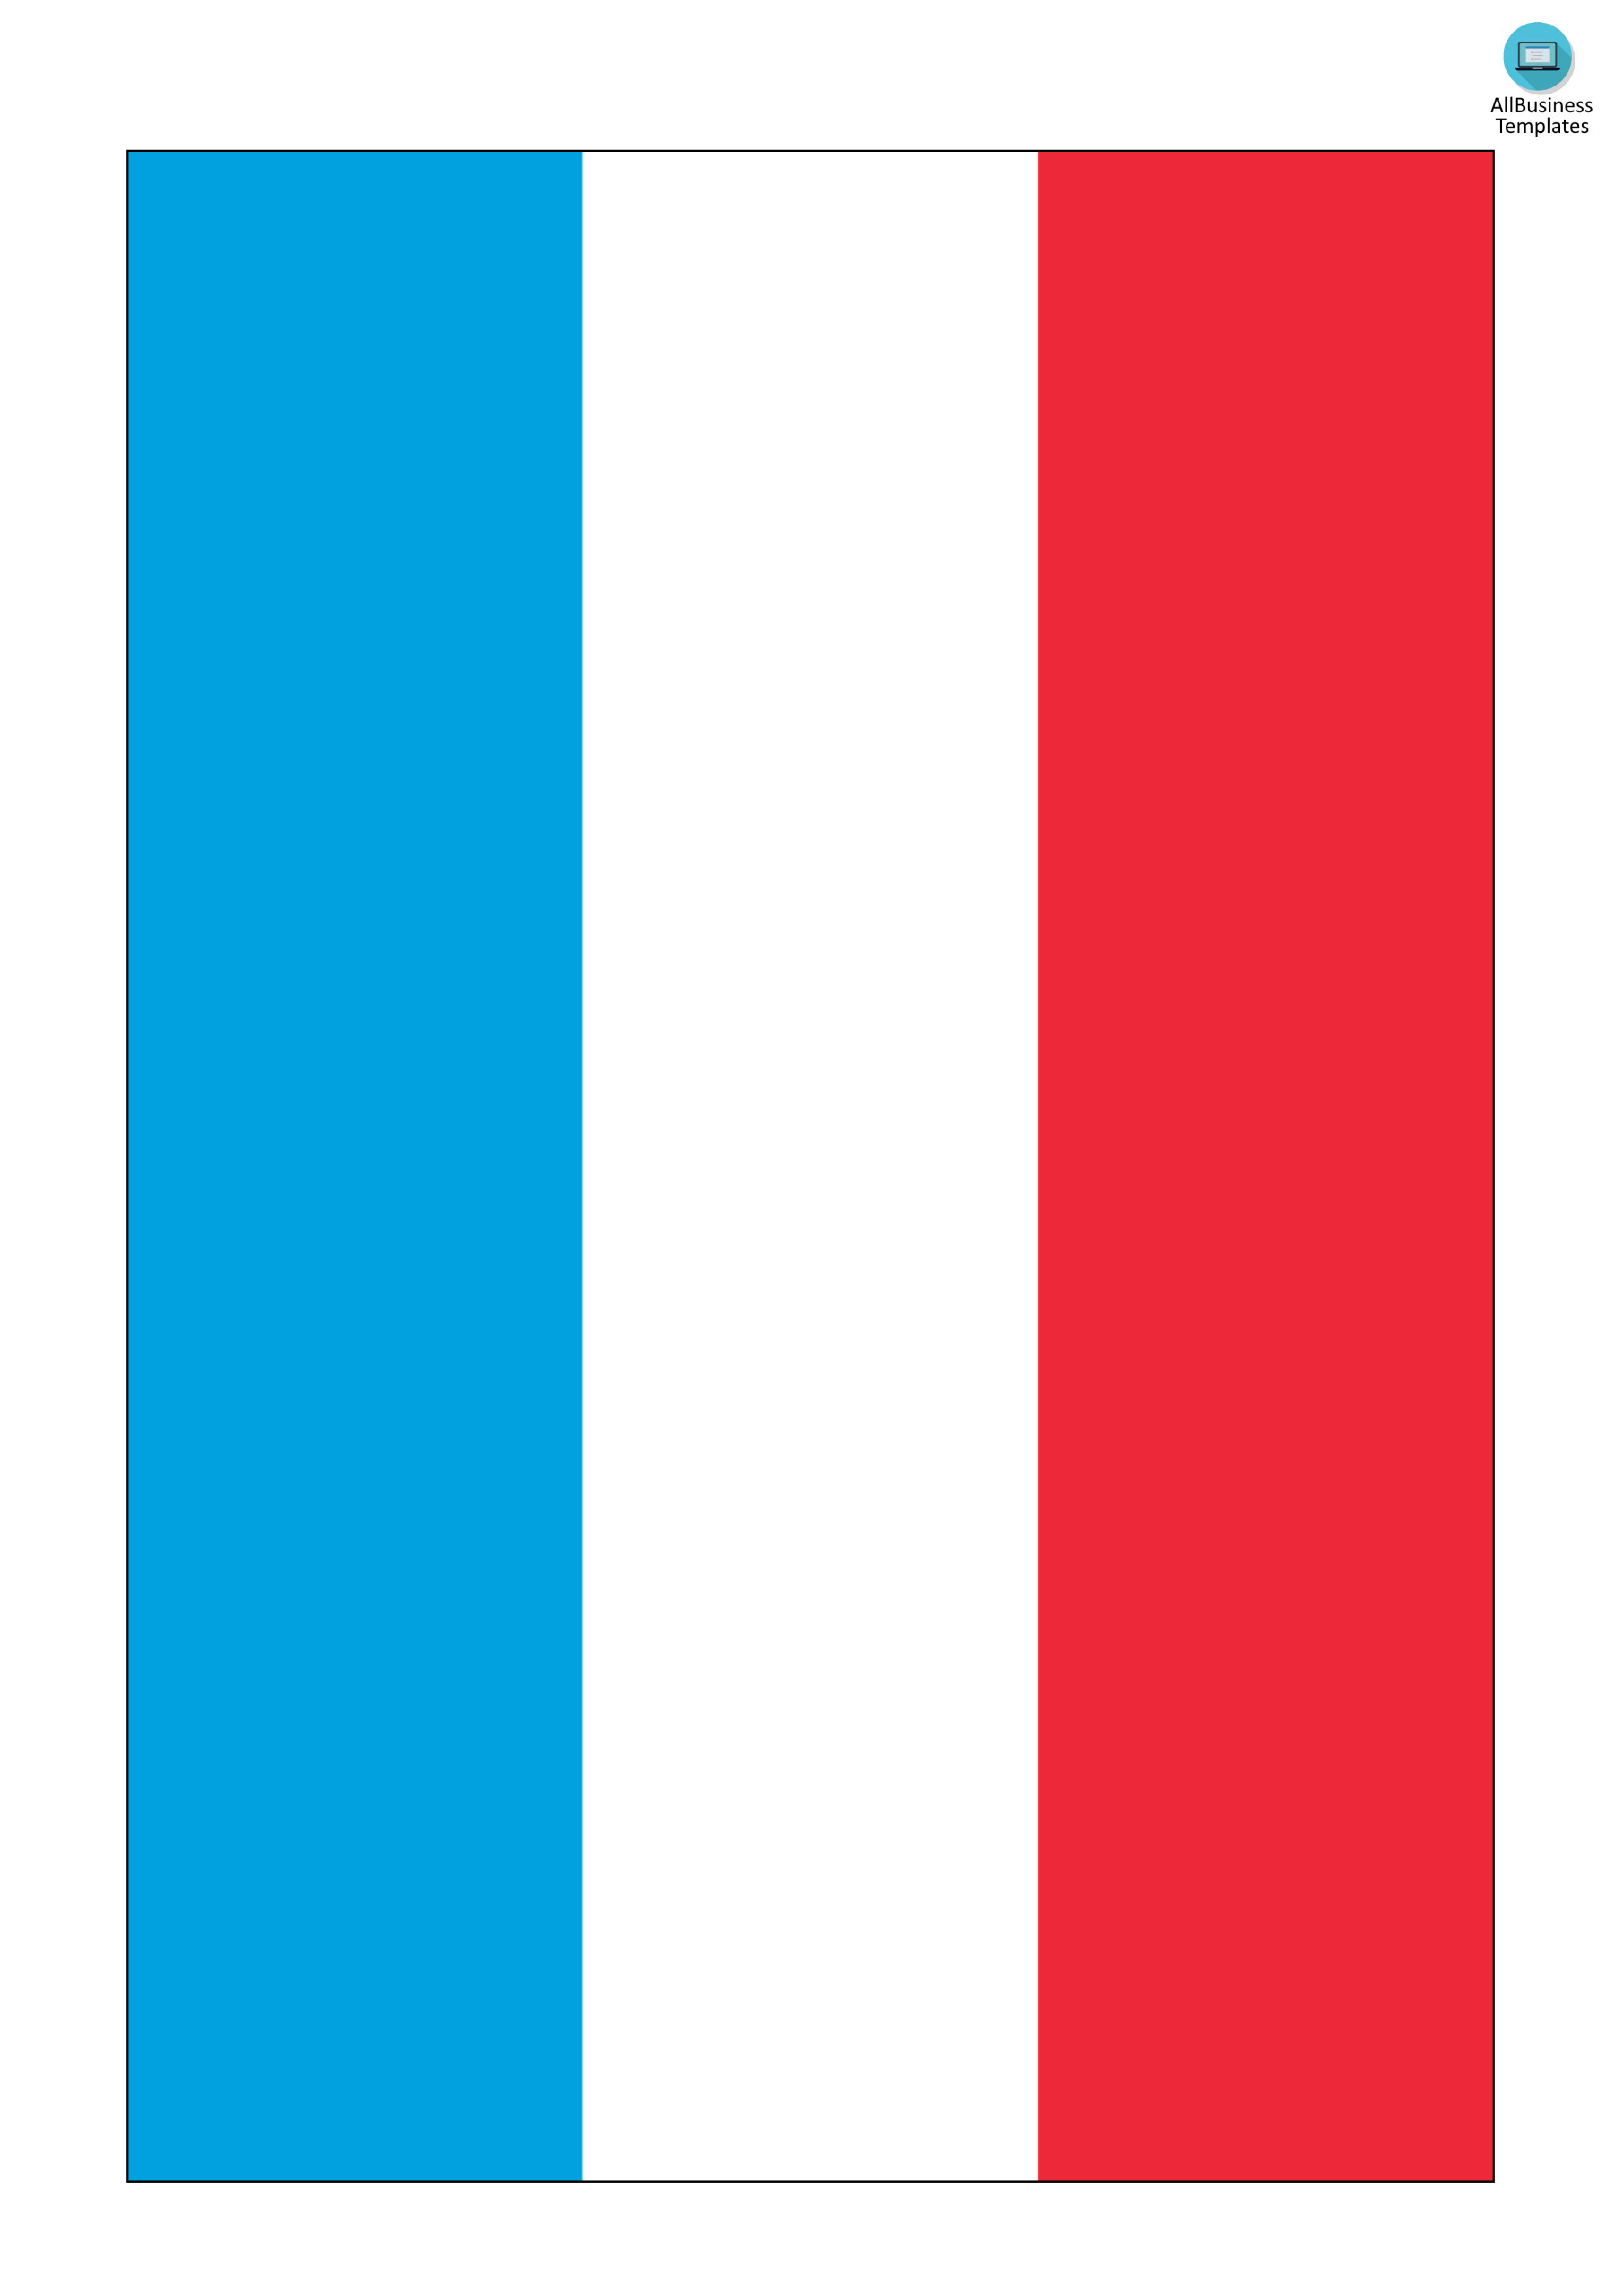 Luxembourg Flag main image